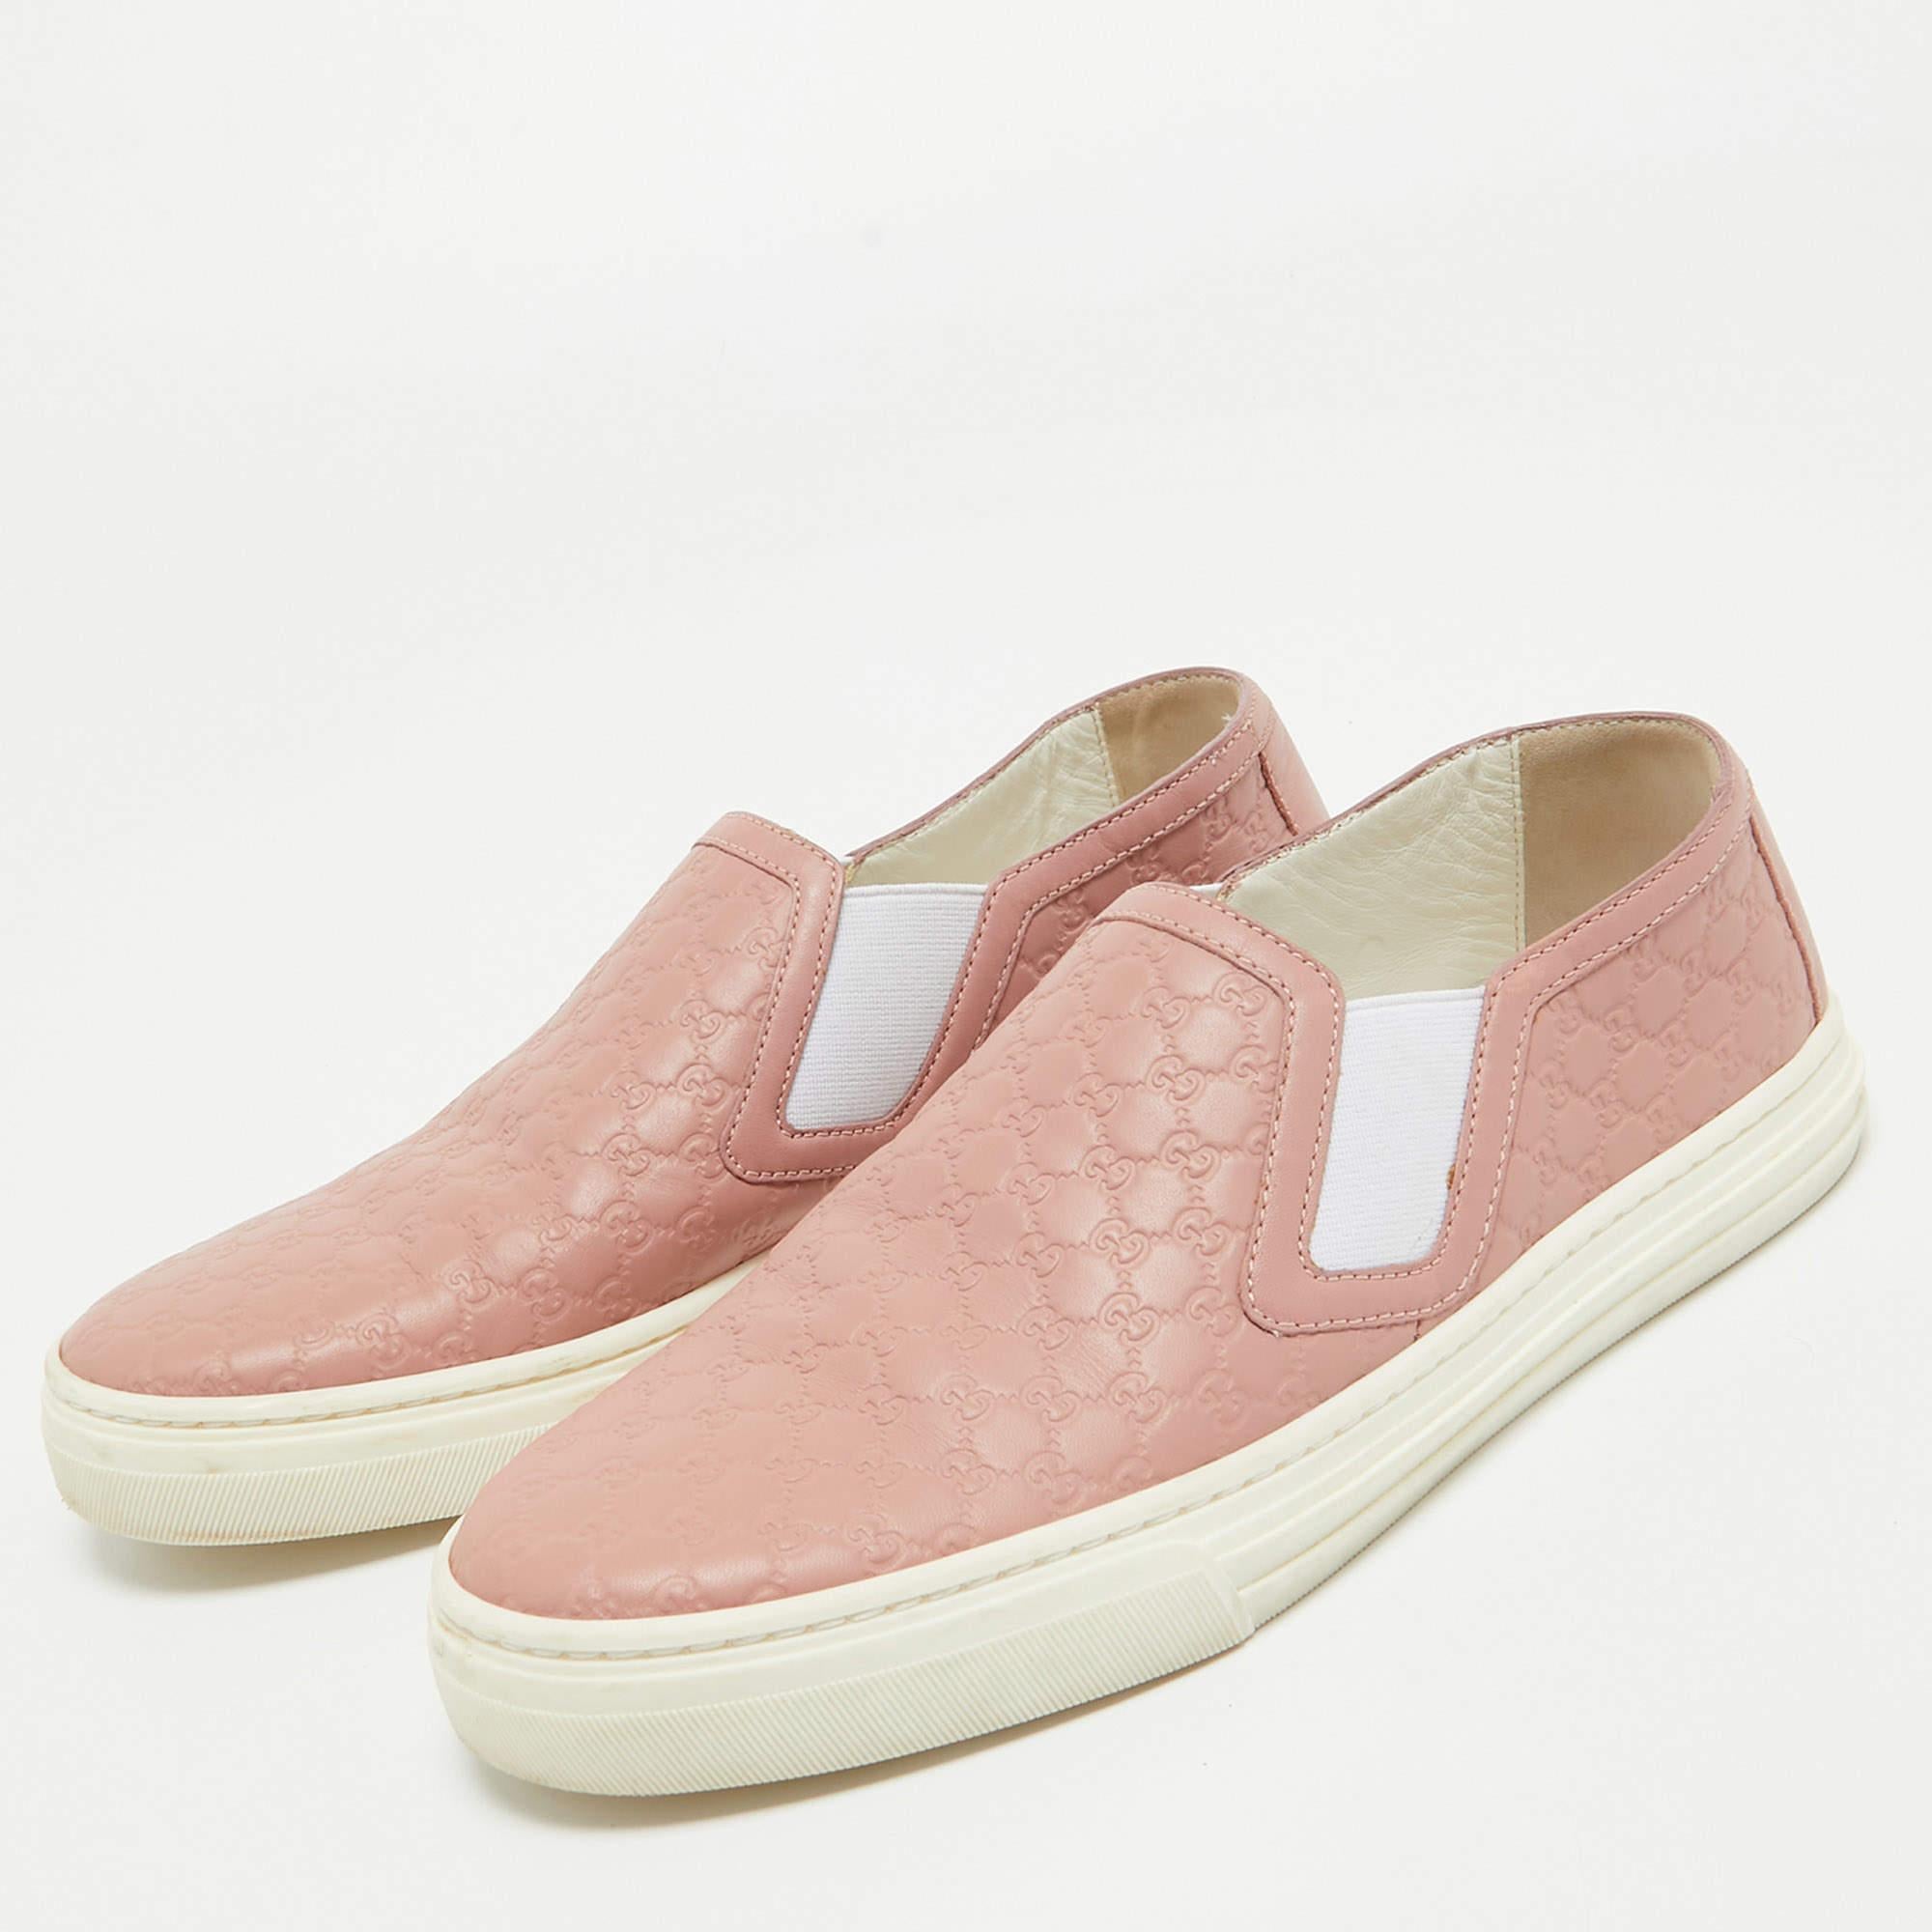 Gucci Pink Microguccissima Leather Slip On Sneakers Size 35.5 For Sale 3